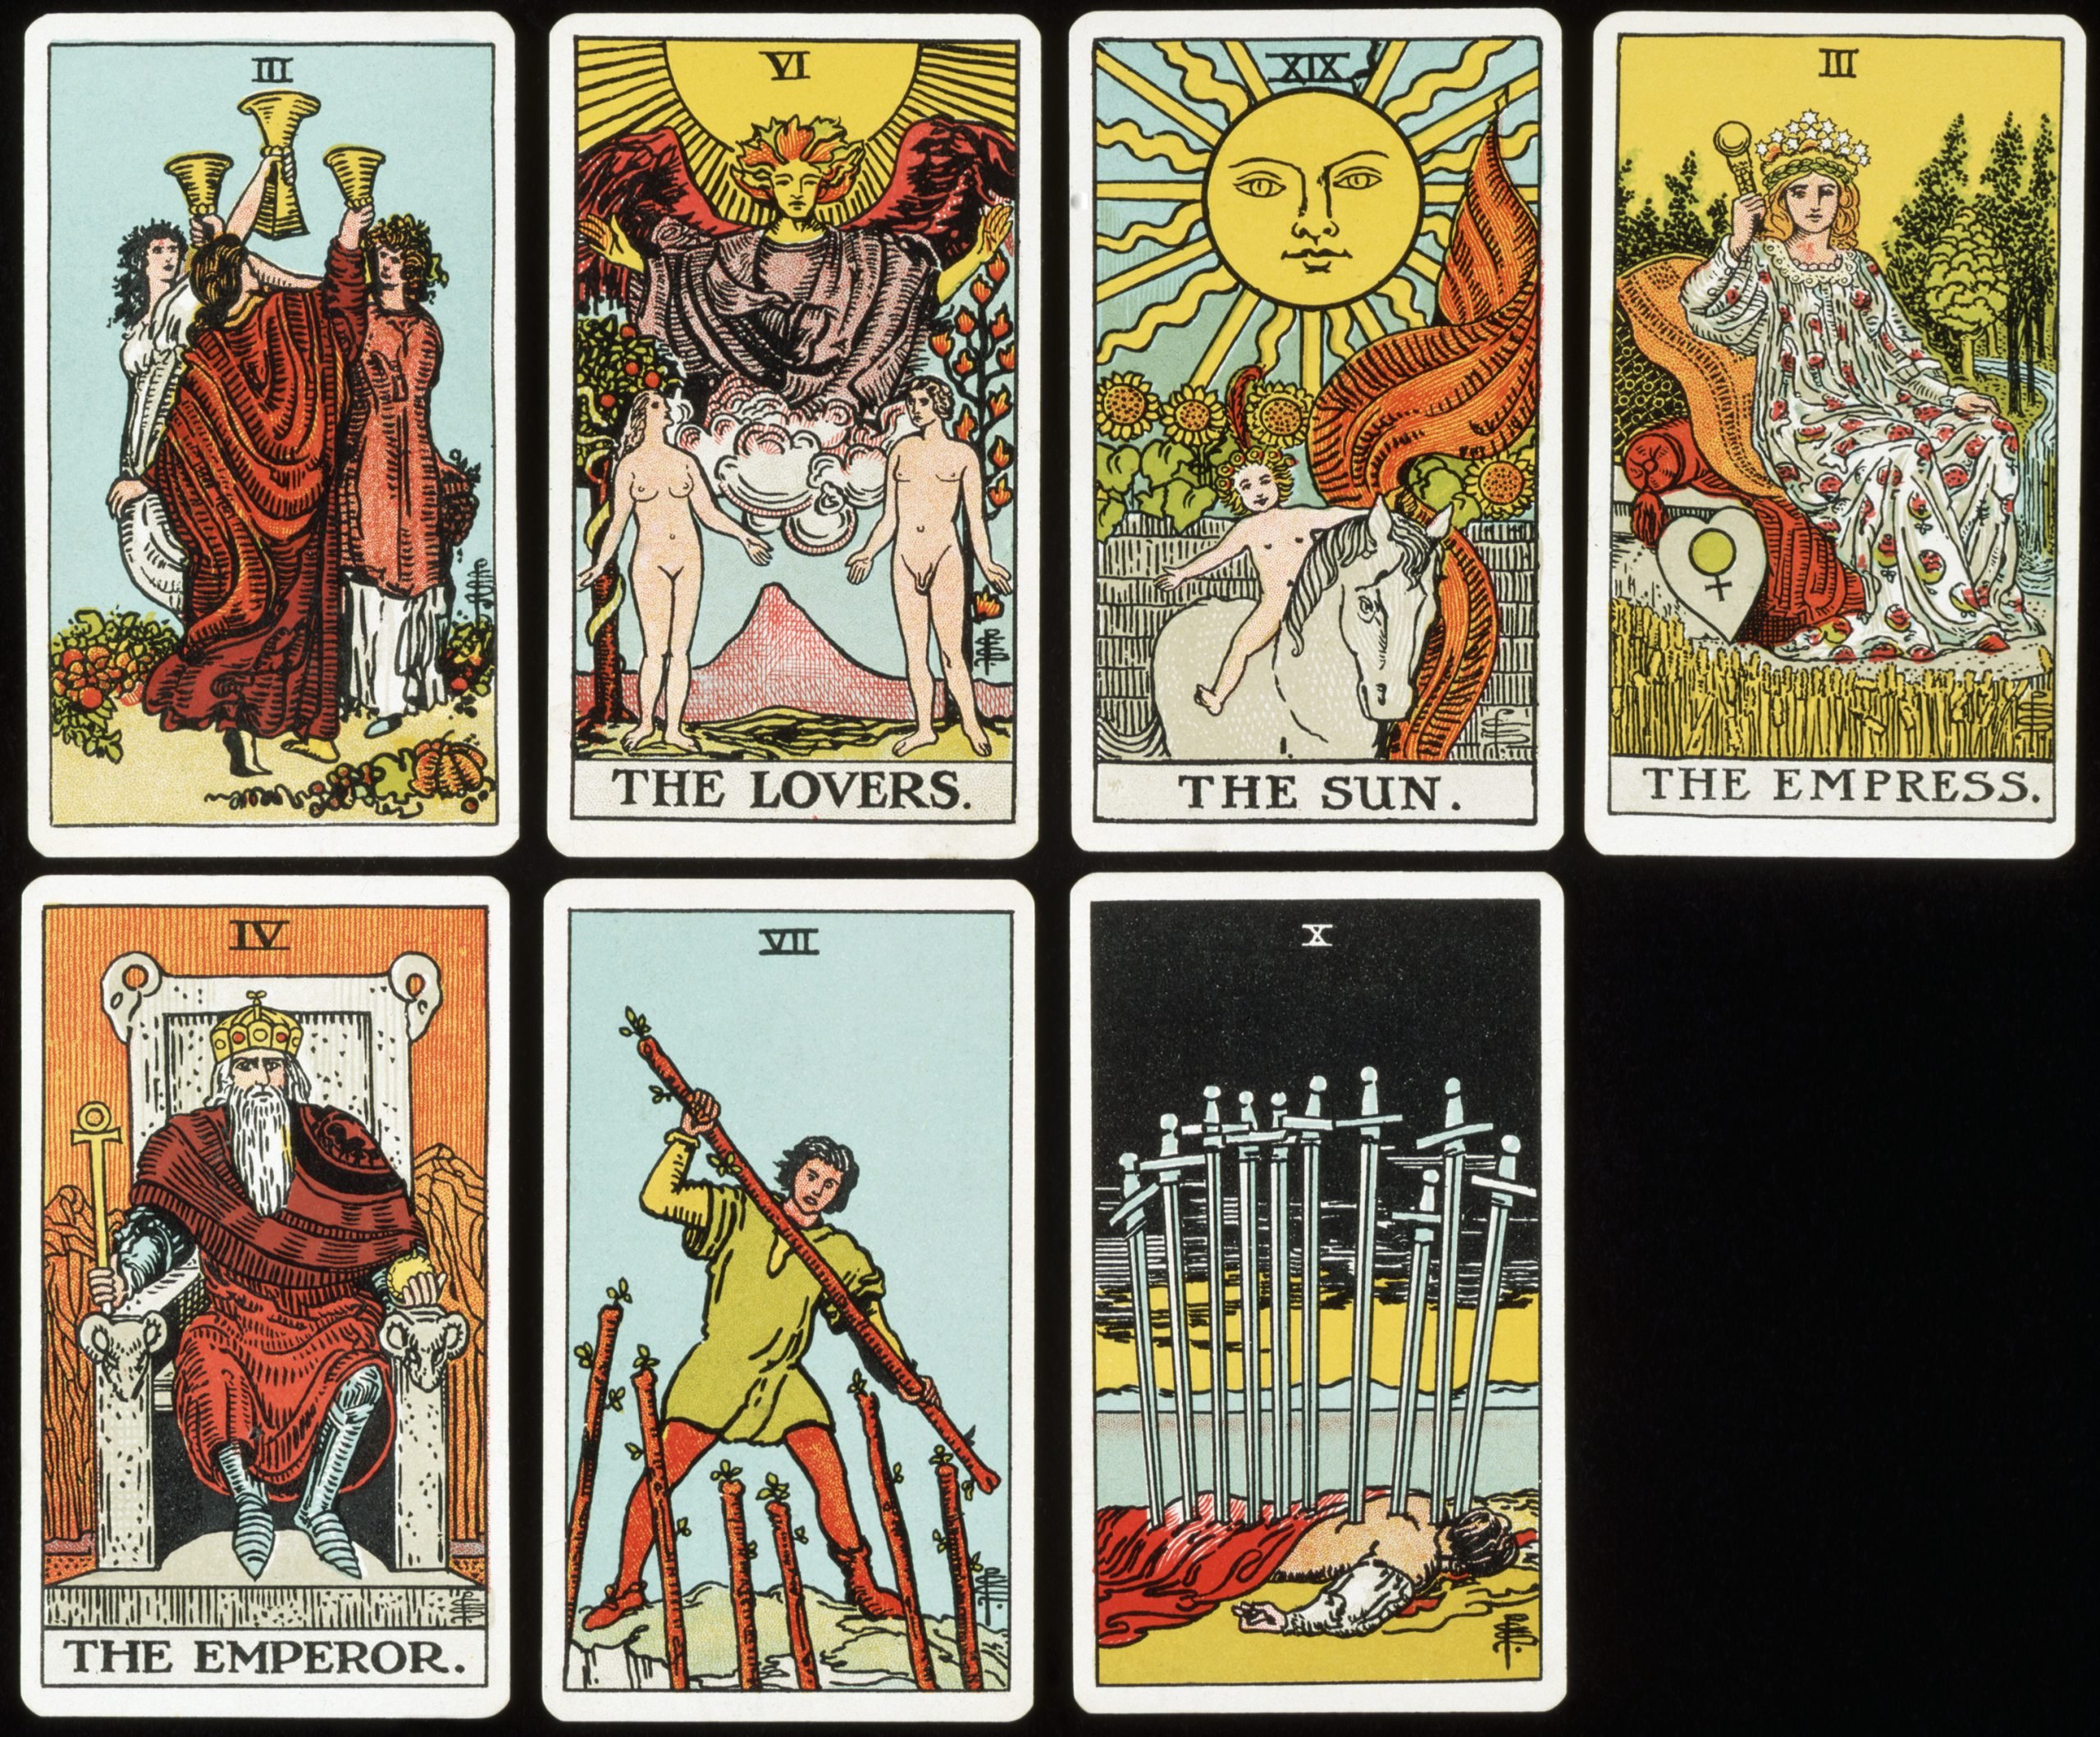 Tarot Cards from the Rider Tarot Deck. Photo by © Historical Picture Archive/CORBIS/Corbis via Getty Images.